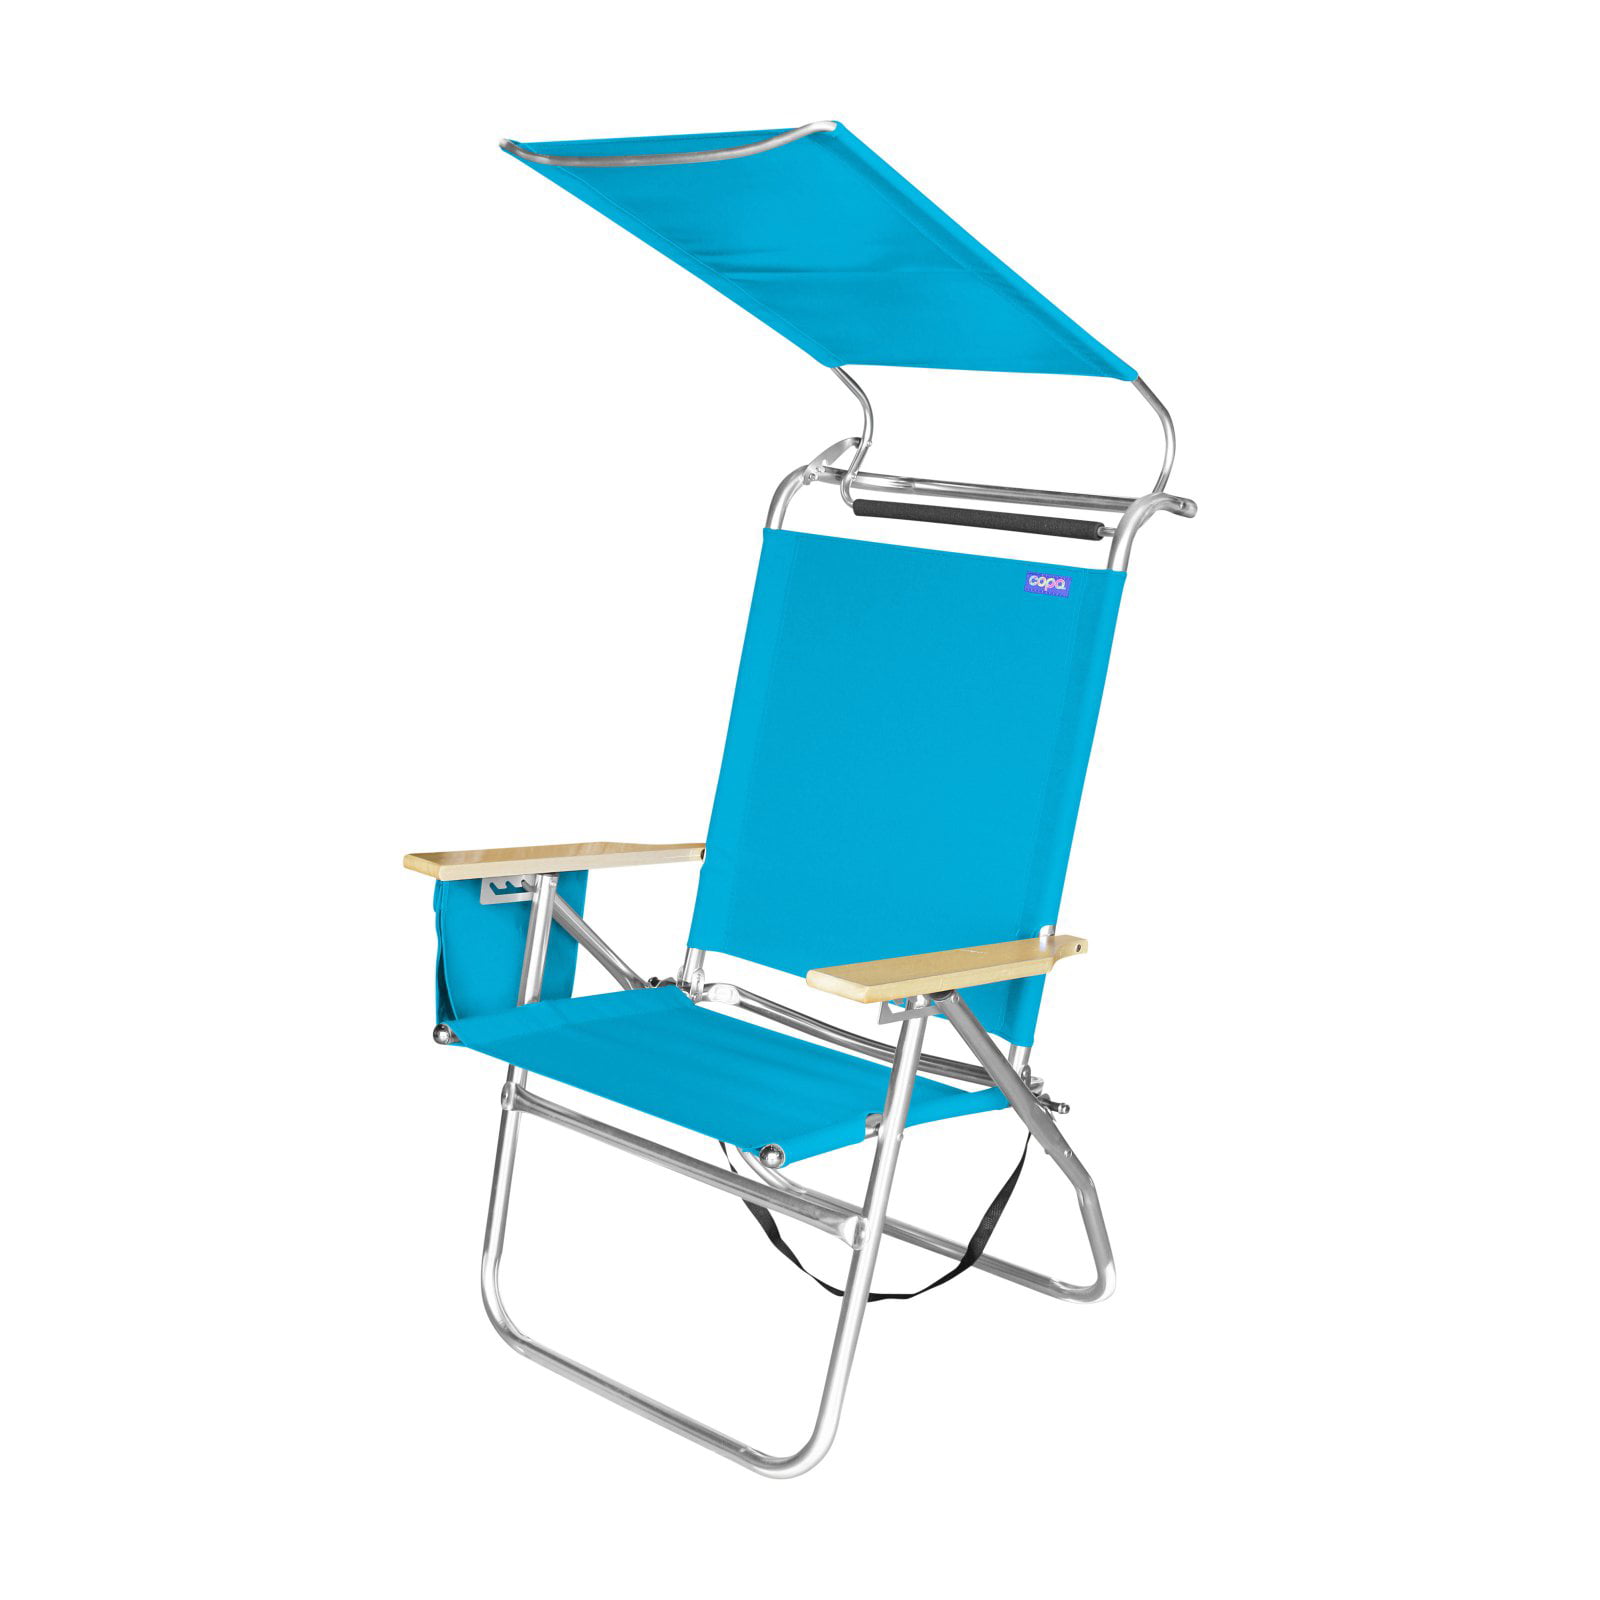 New Beach Sand Chair With Canopy for Small Space